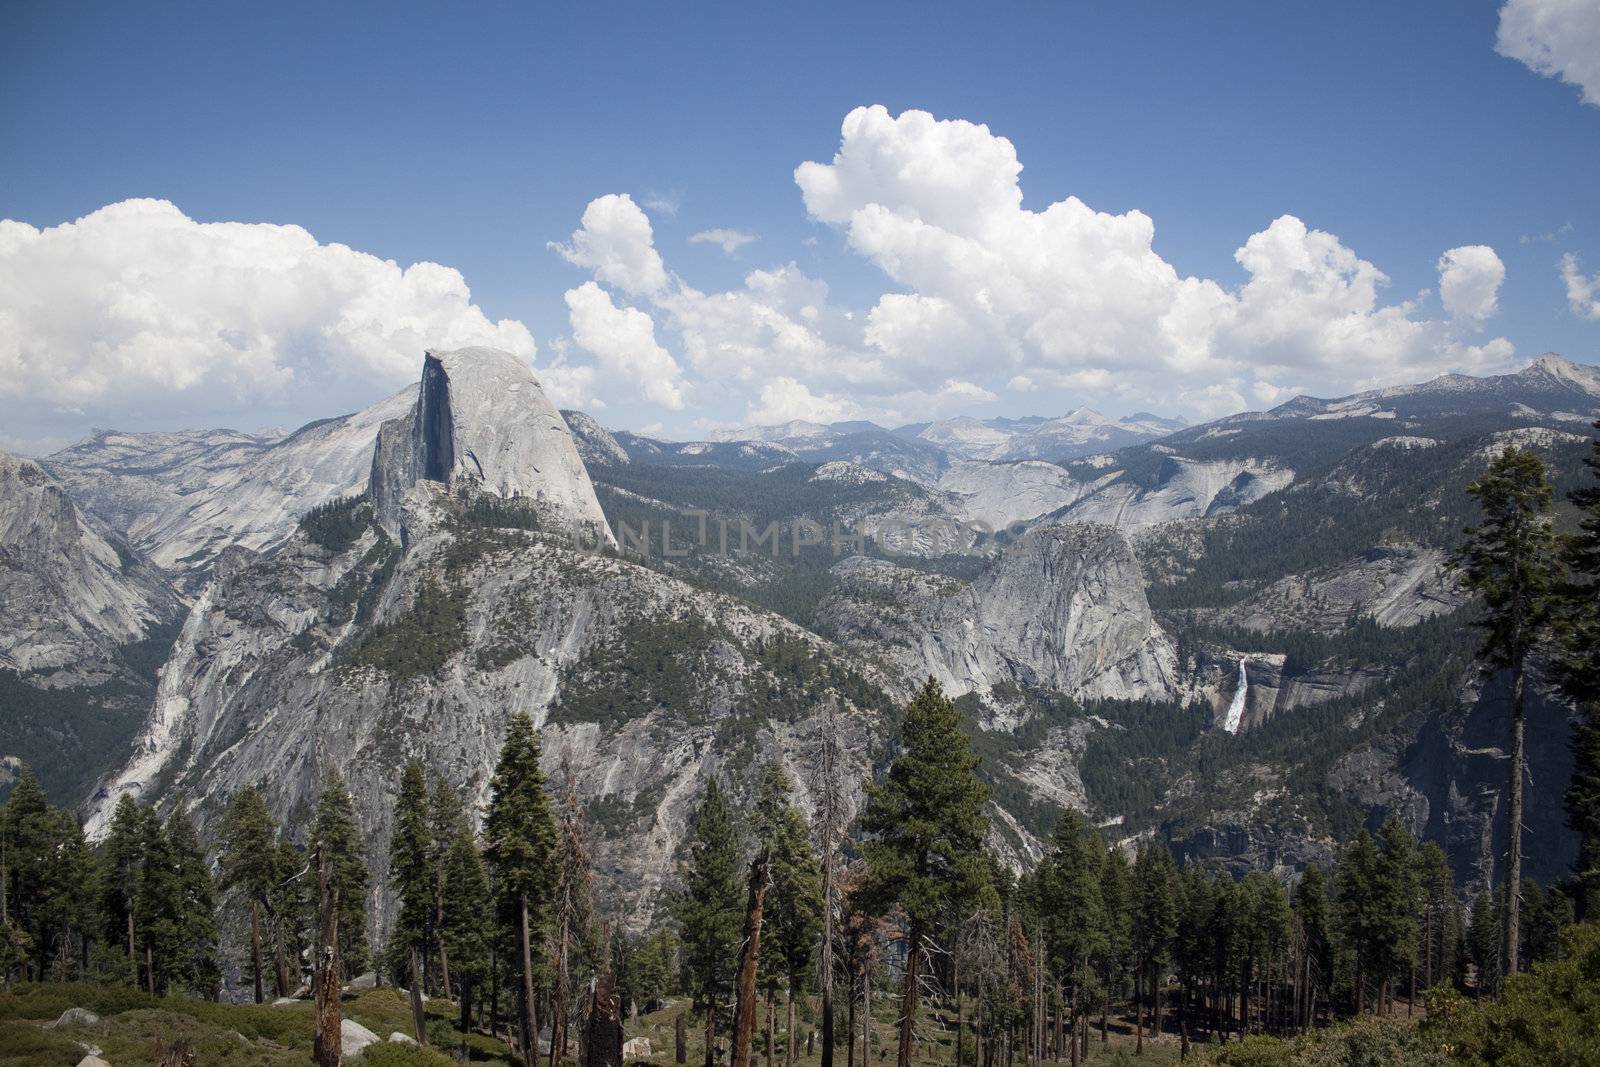 Yosemite National Park in the summer.